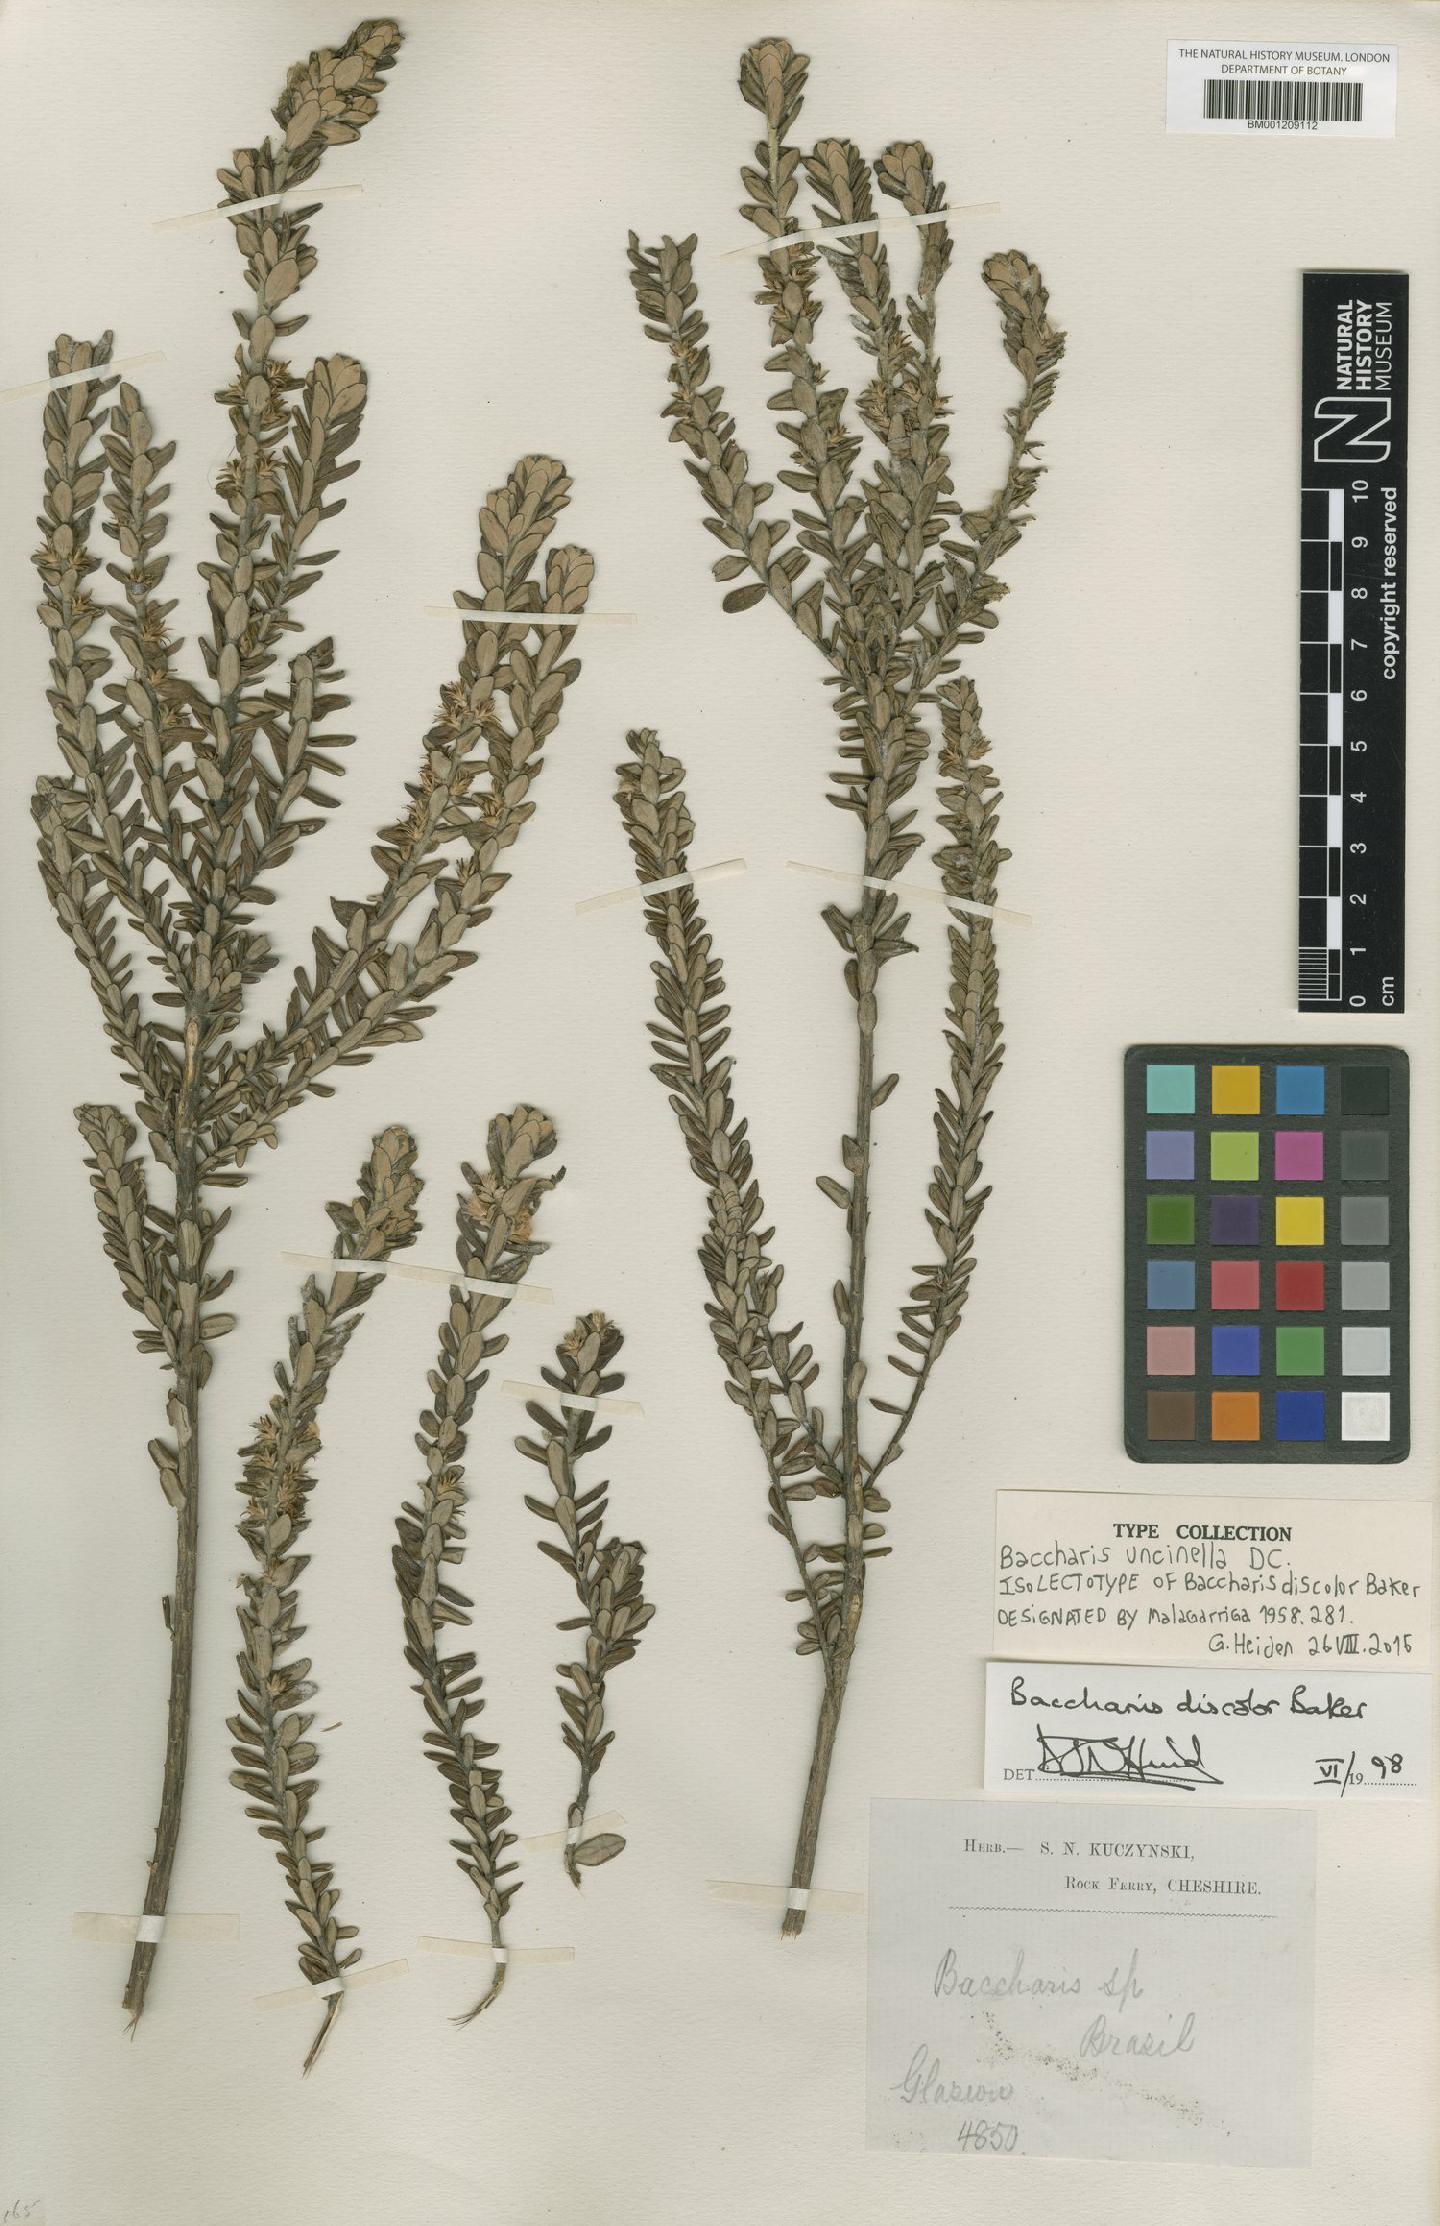 To NHMUK collection (Baccharis uncinella DC.; Isolectotype; NHMUK:ecatalogue:6731289)